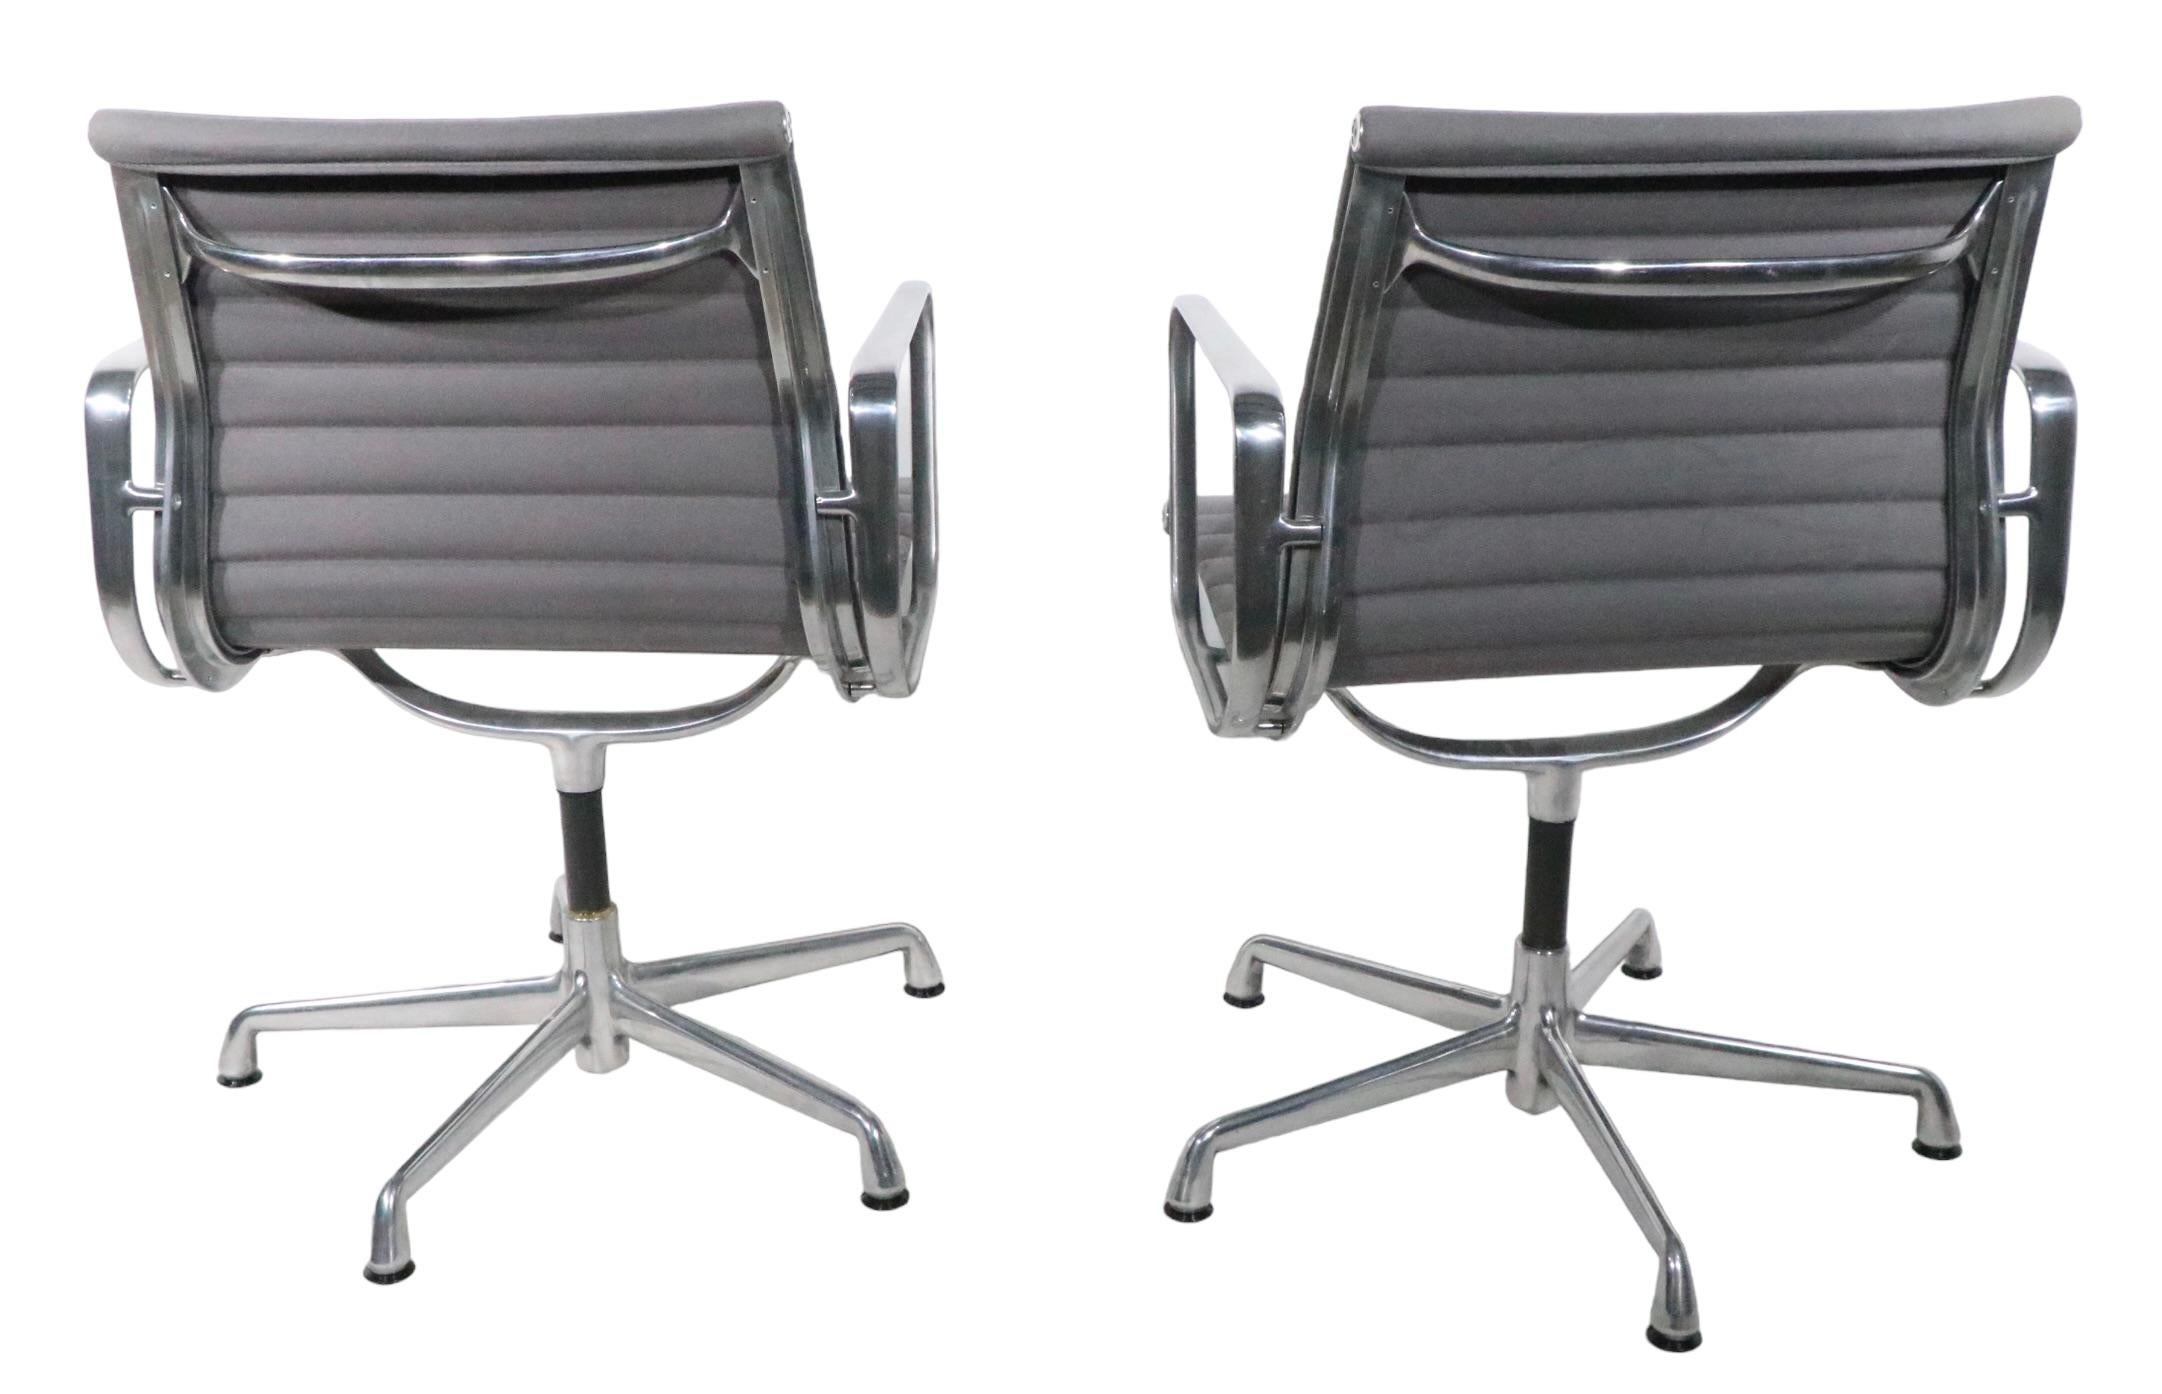 American Eames Management Chairs in Grey Fabric Upholstery c. 1980 - 1990s 4 Available  For Sale